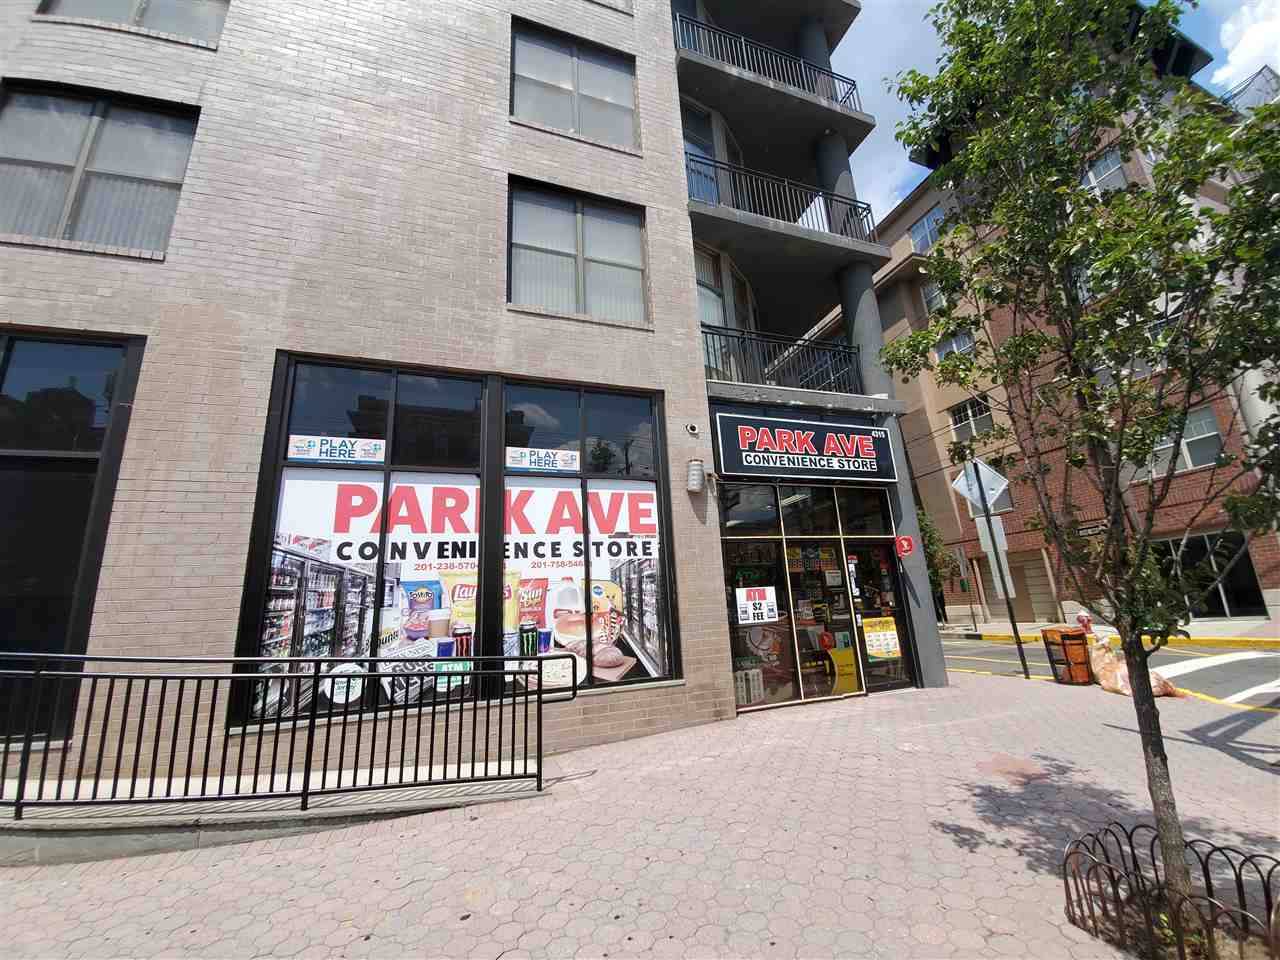 4315 PARK AVE Commercial New Jersey